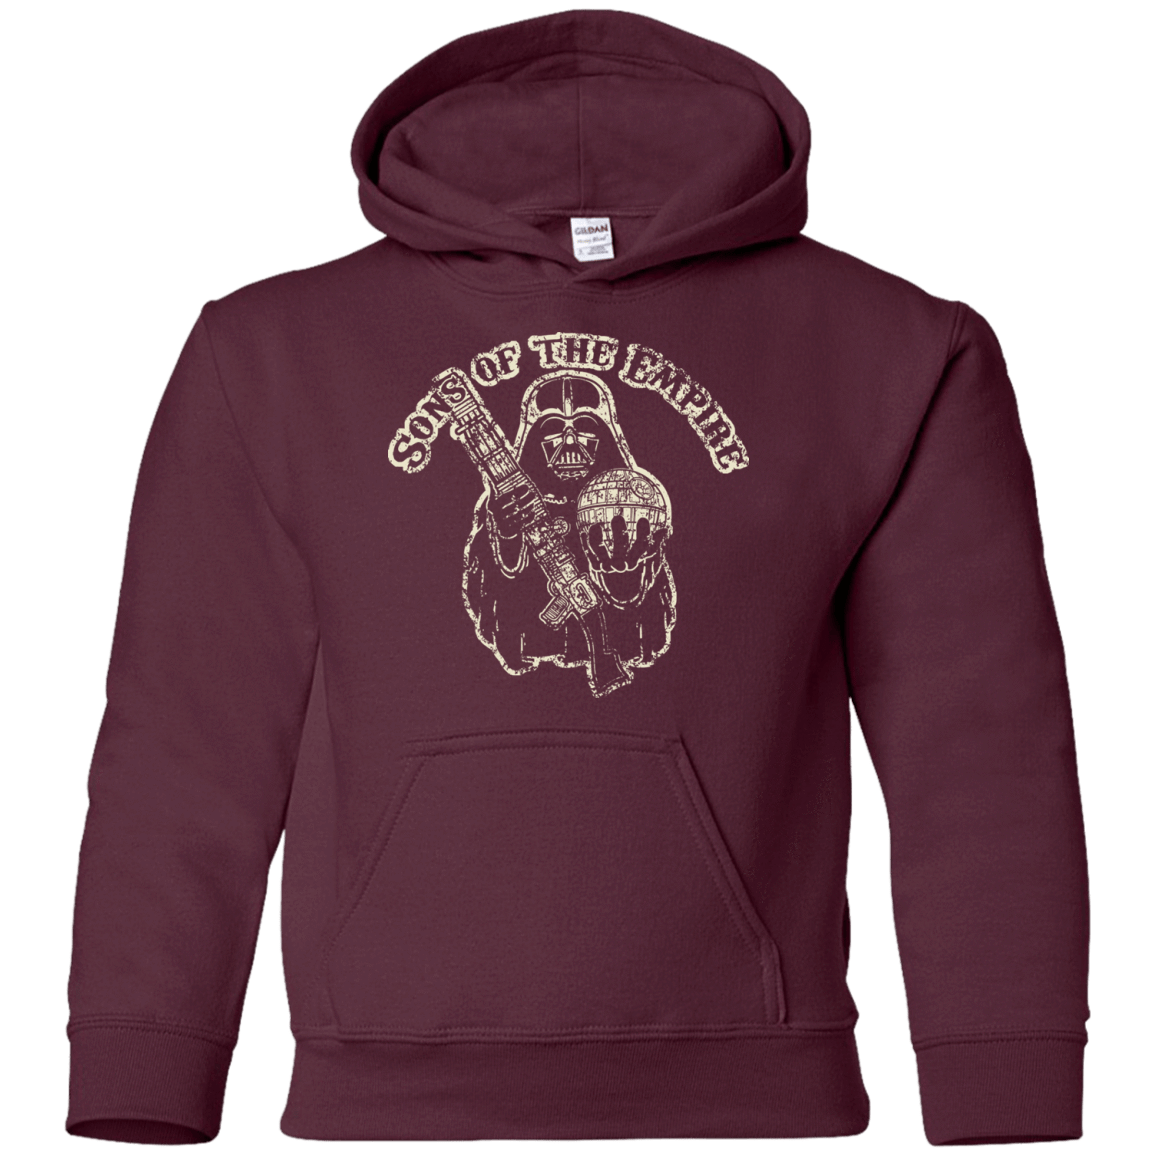 Sweatshirts Maroon / YS Sons of the empire Youth Hoodie